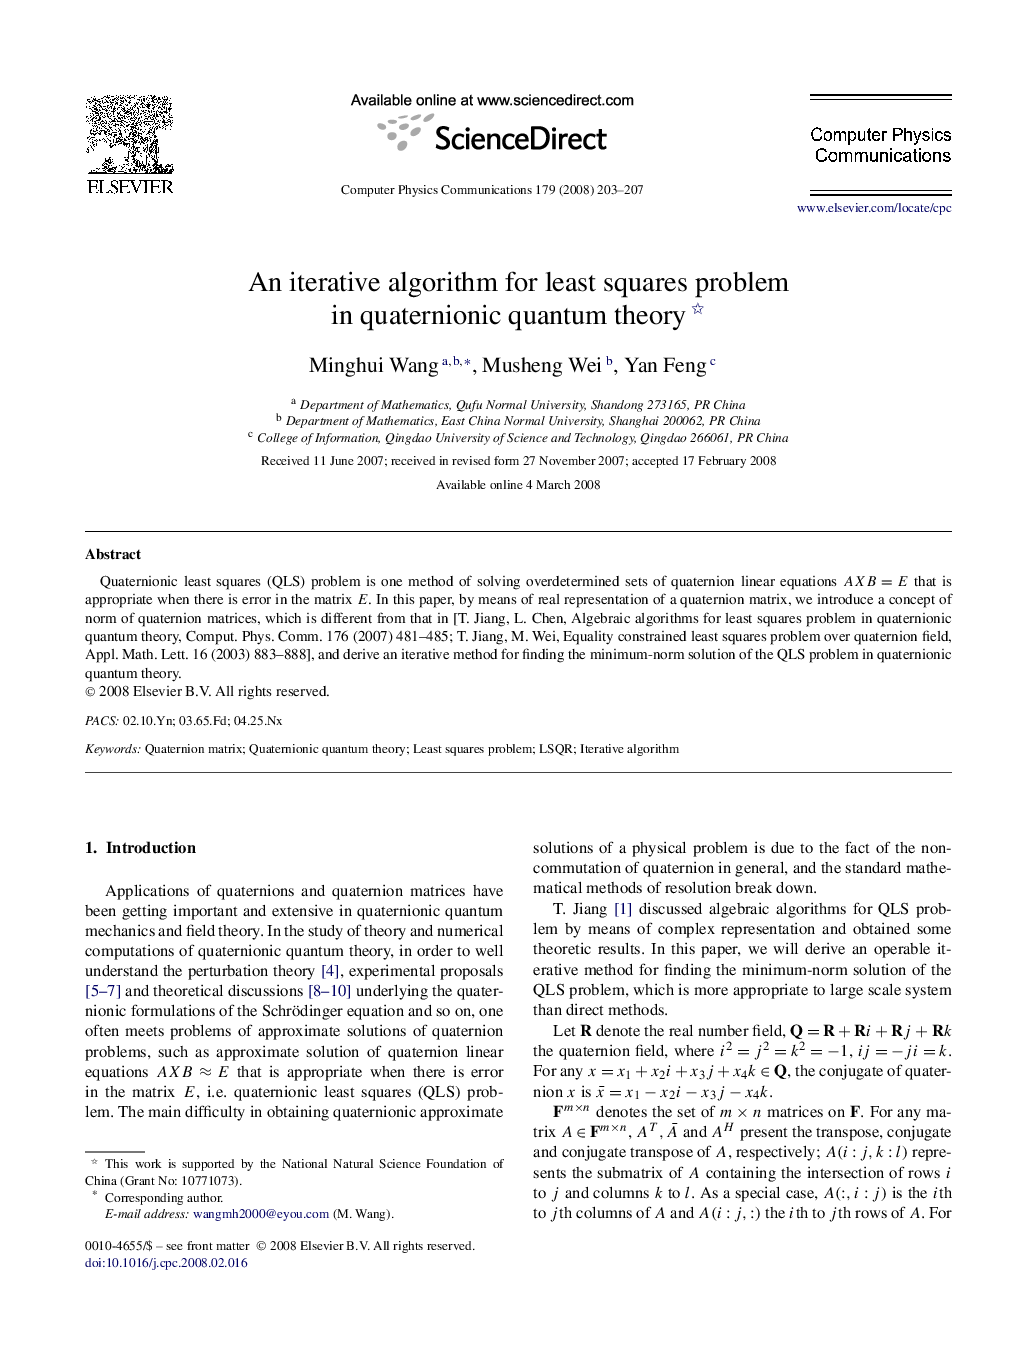 An iterative algorithm for least squares problem in quaternionic quantum theory 